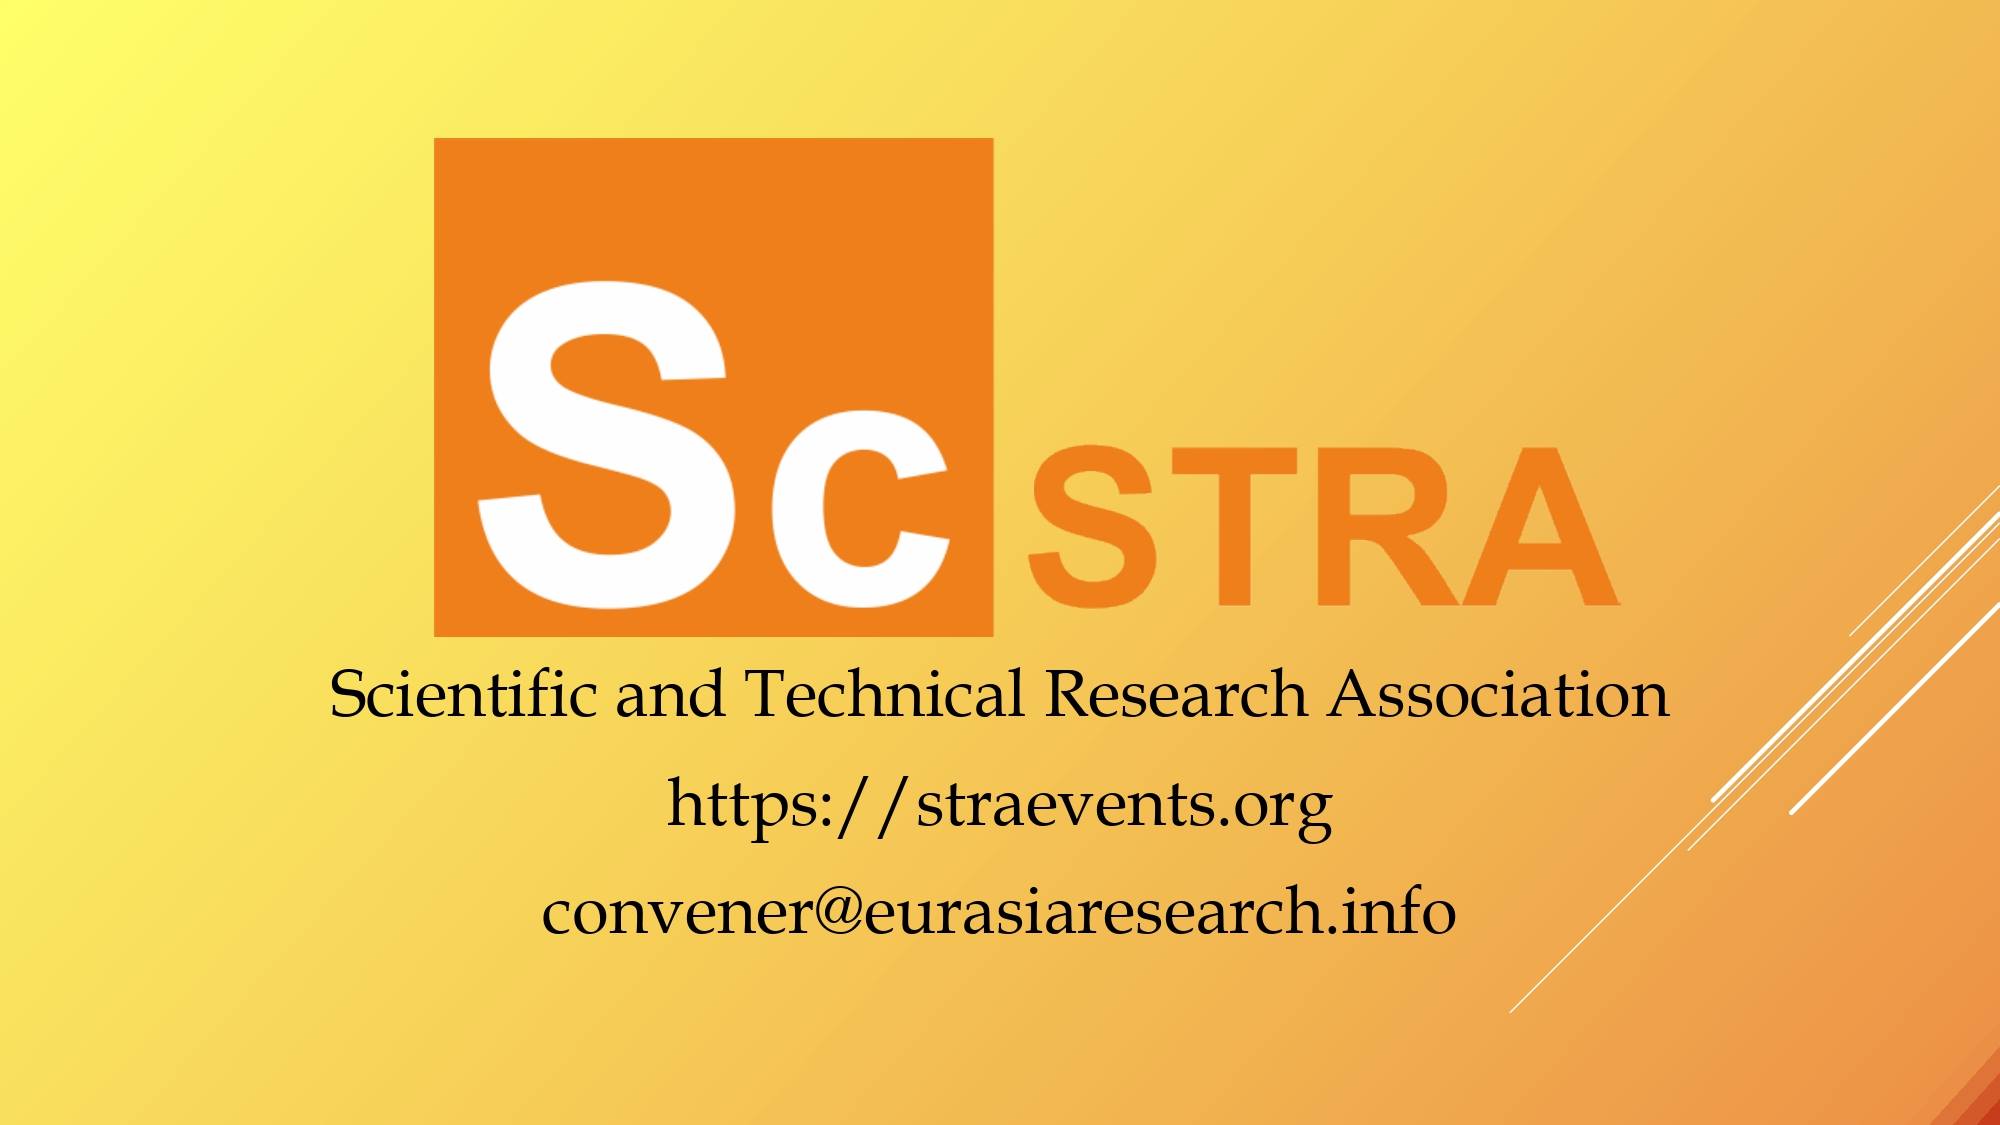 ICSTR Rome – International Conference on Science & Technology Research, 15-16 April 2021, Rome, Italy